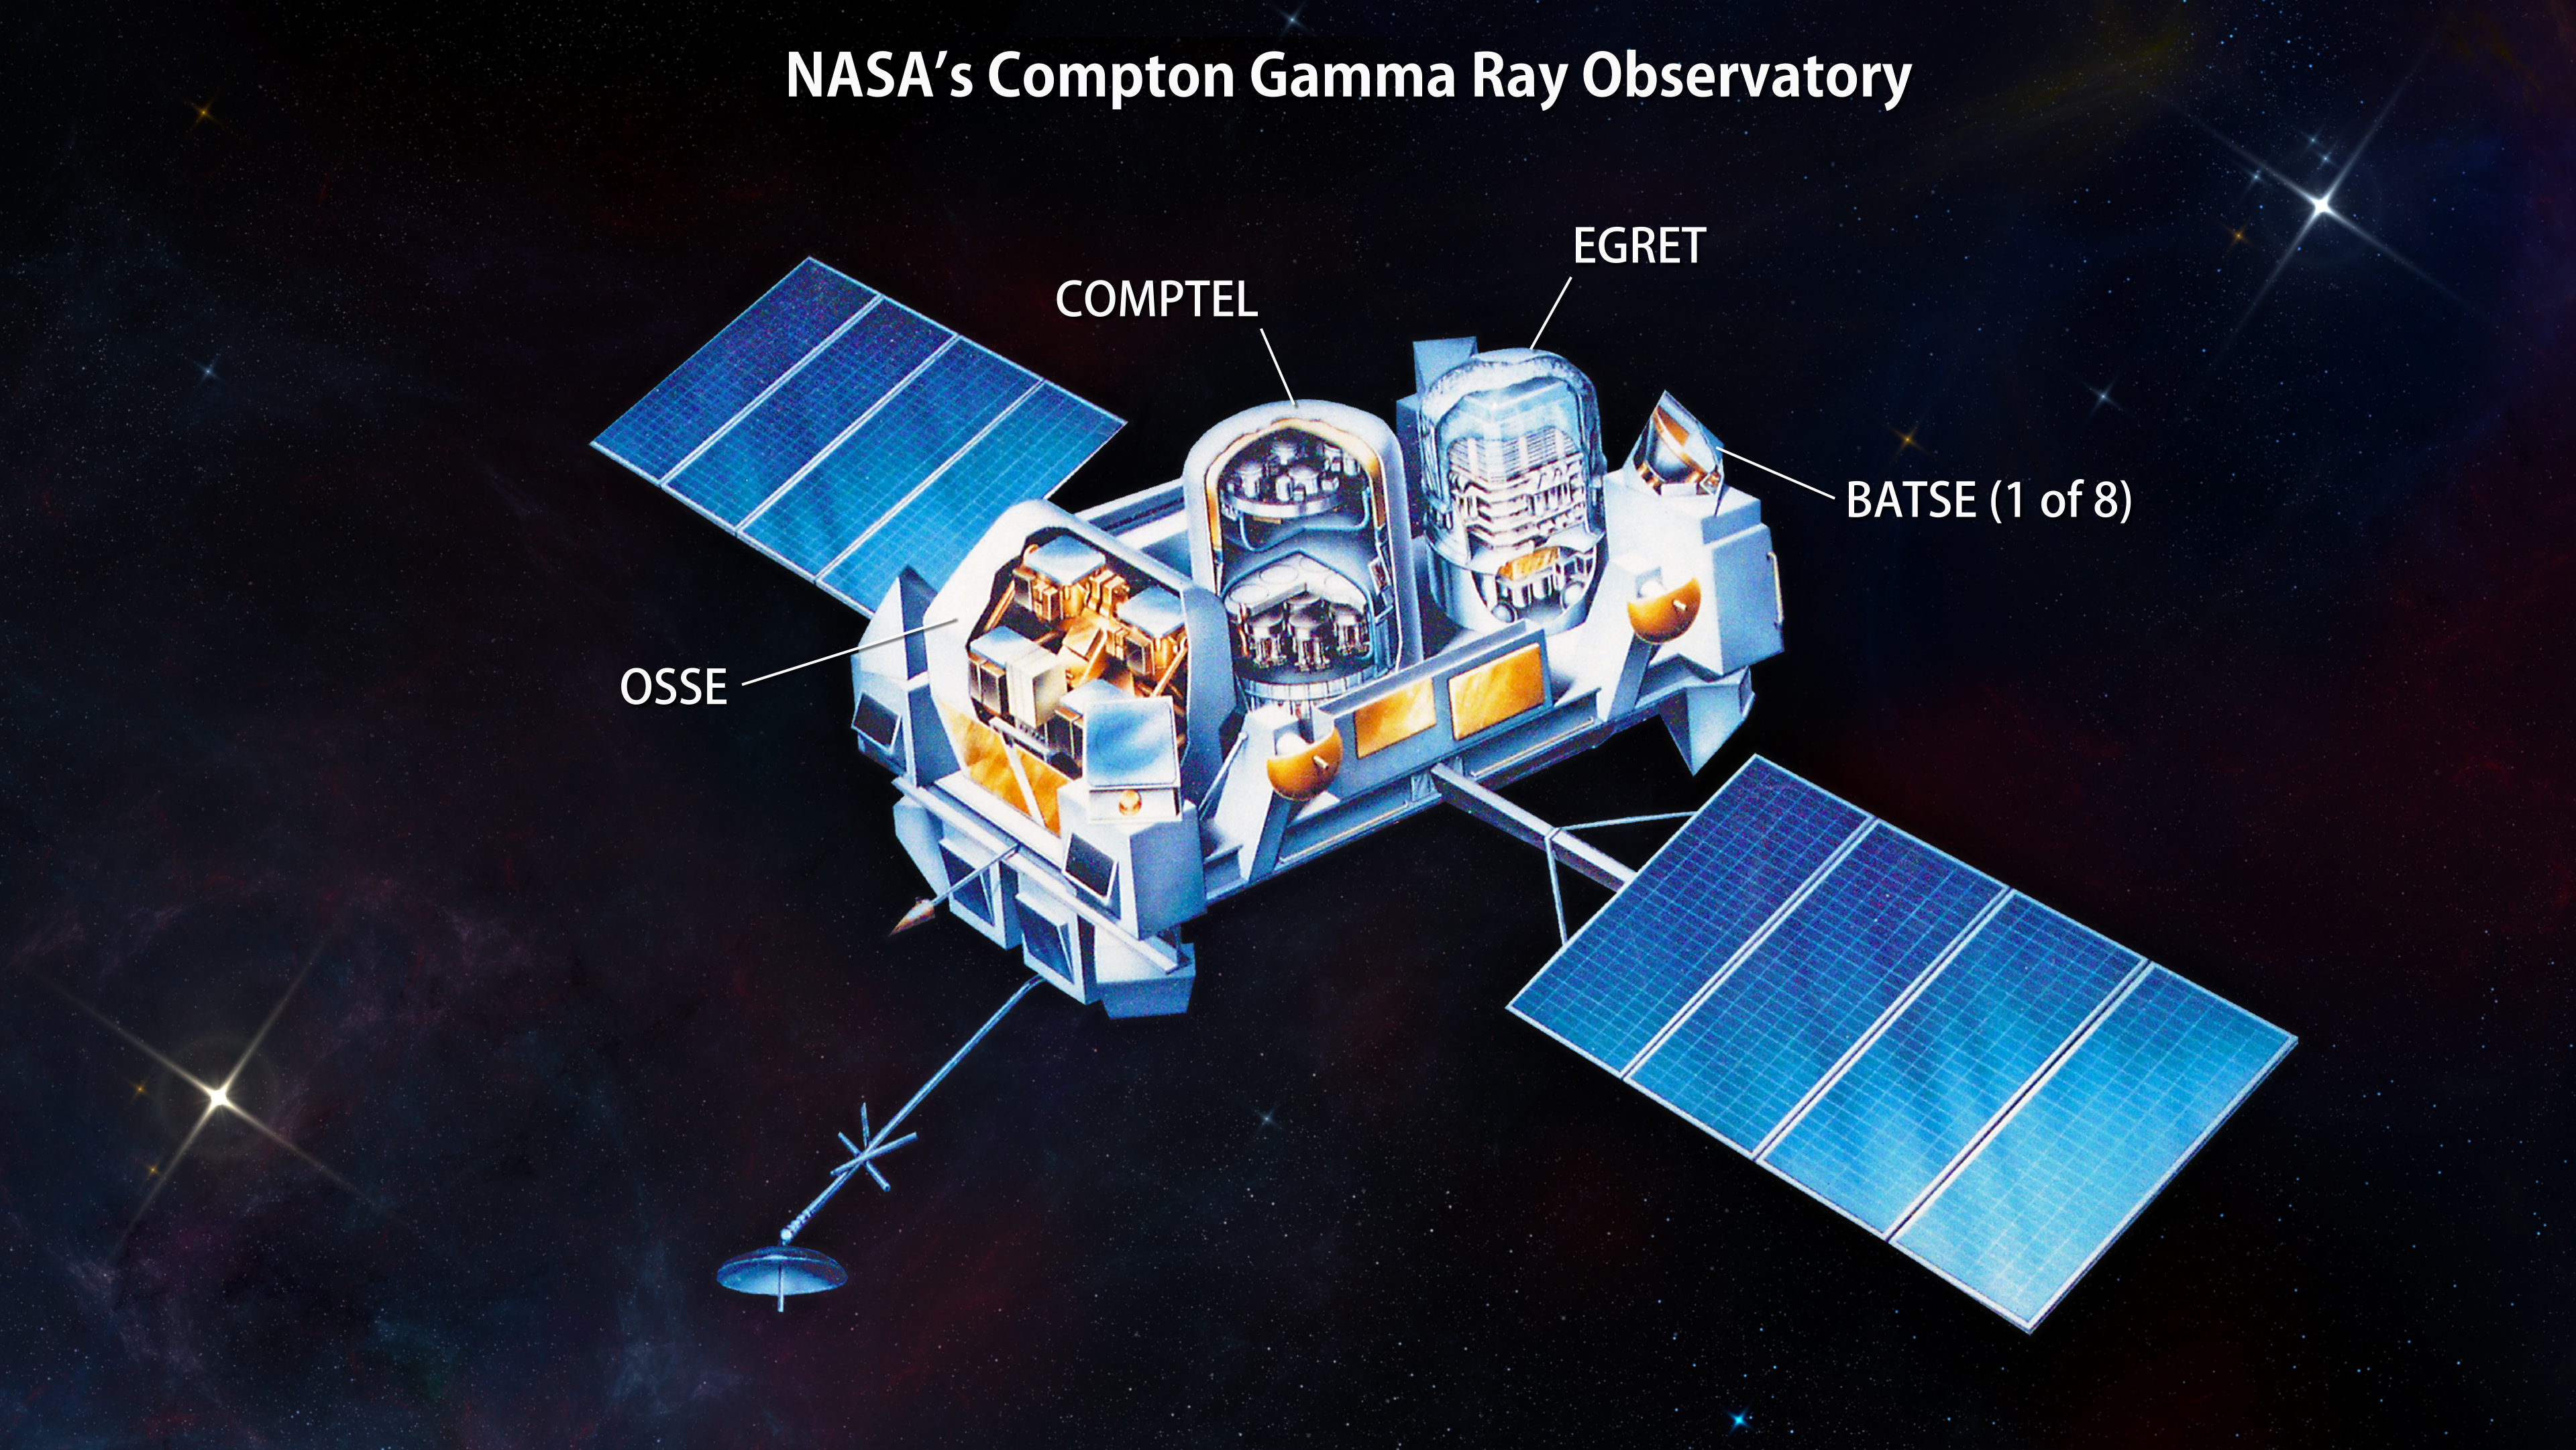 This illustration of the Compton Gamma Ray Observatory shows the locations of its four instruments, the Burst And Transient Source Experiment (BATSE), the Oriented Scintillation Spectrometer Experiment (OSSE), the Imaging Compton Telescope (COMPTEL), and the Energetic Gamma Ray Experiment Telescope (EGRET). Credit: NASA's Goddard Space Flight Center